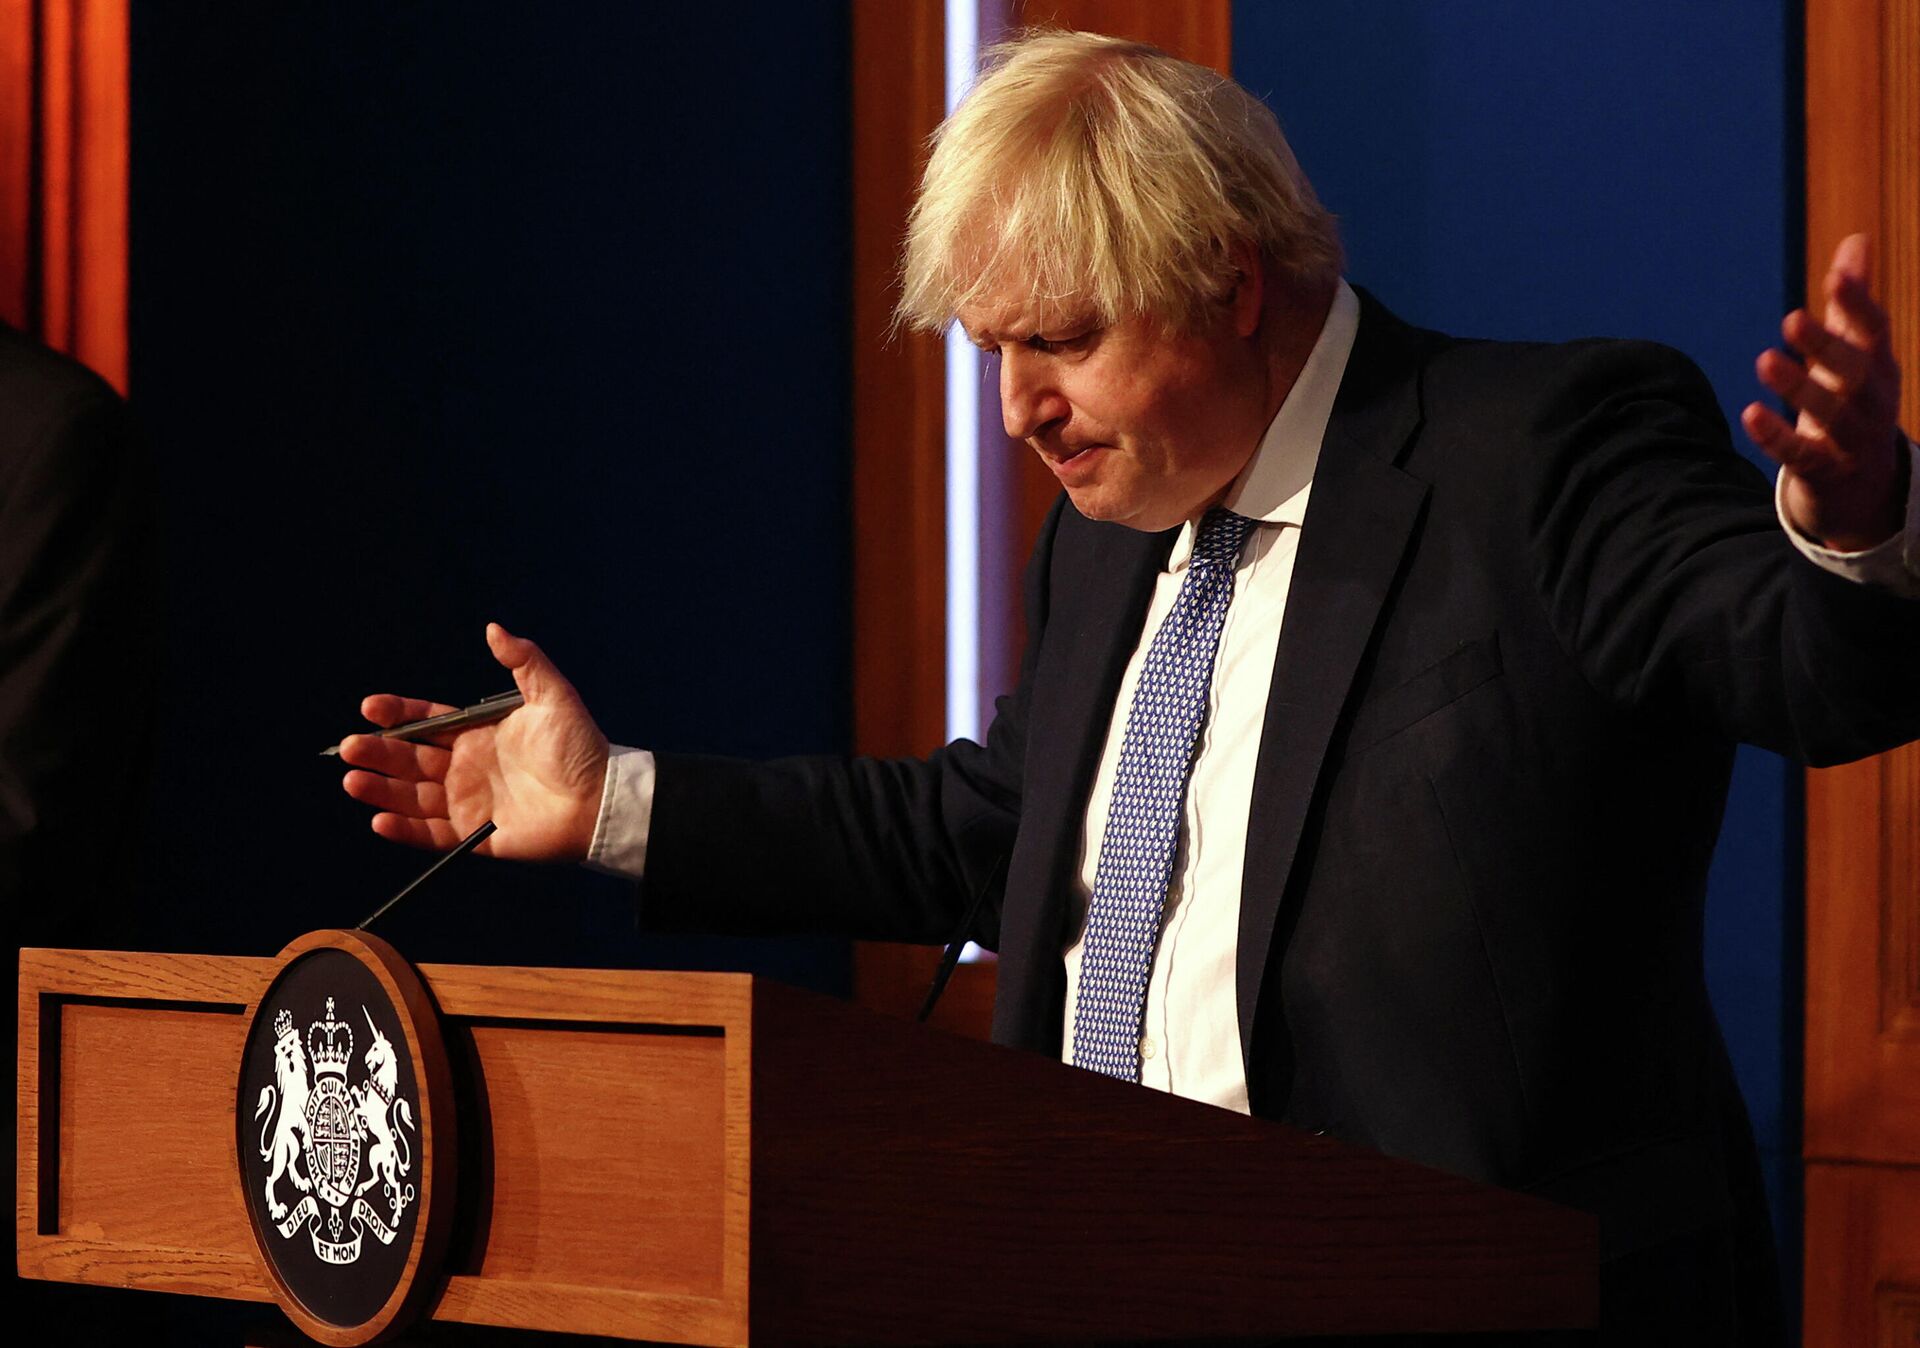 Britain's Prime Minister Boris Johnson gestures during a press conference for the latest COVID-19 update in the Downing Street briefing room in central London on December 8, 2021. - Sputnik International, 1920, 15.12.2021